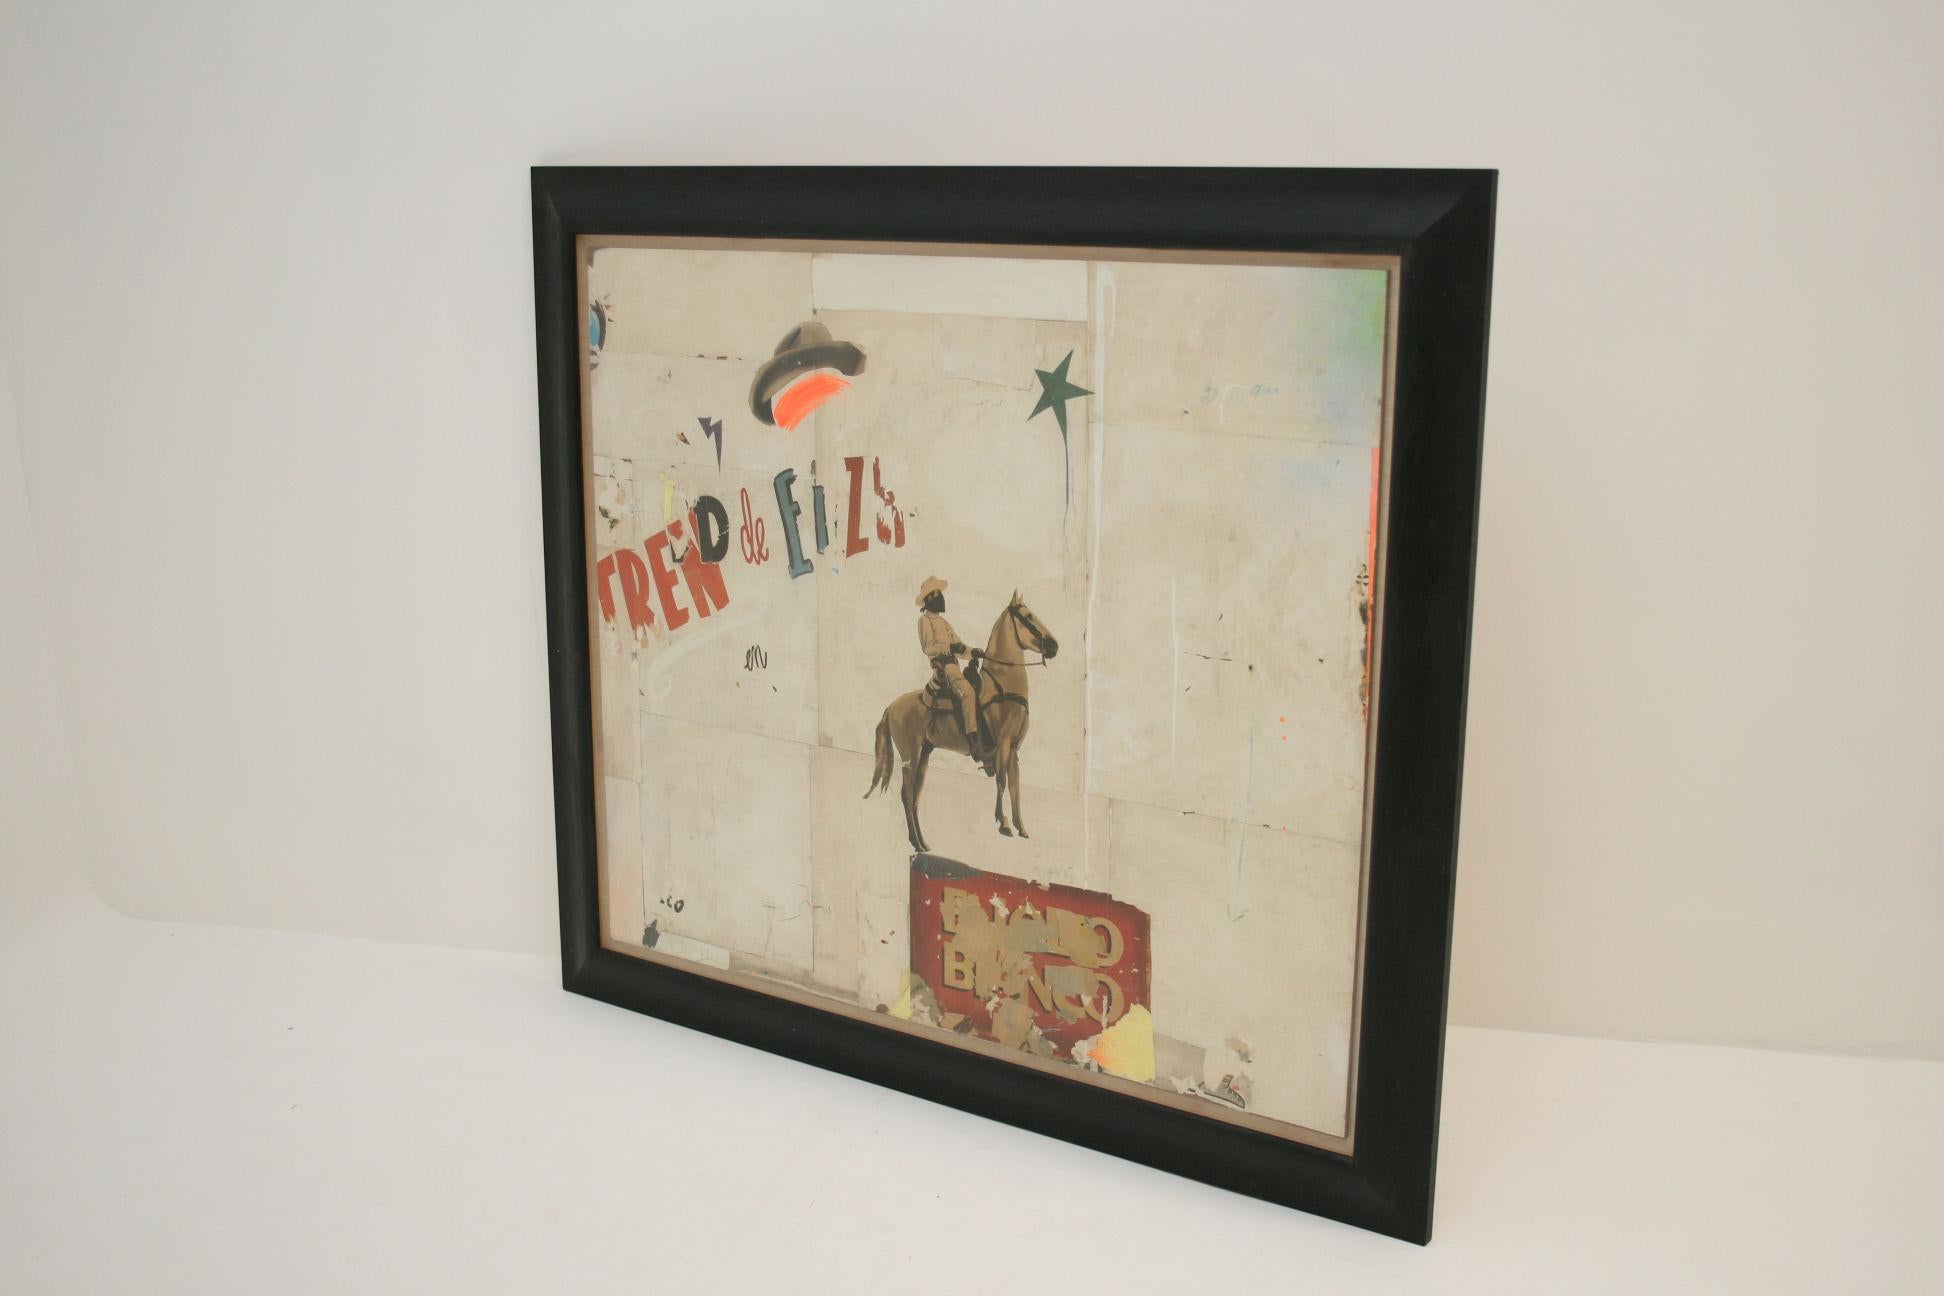 Bronco Bianco
Large abstract collage by artist Huw Griffith.
Collage: 19th century French ephemera, film posters from 1930s, 1940s & 1950s, graphite crayons and household paint.
Lone Ranger, cowboys, playful.
Size: 144.5 cm wide x 127 cm high x